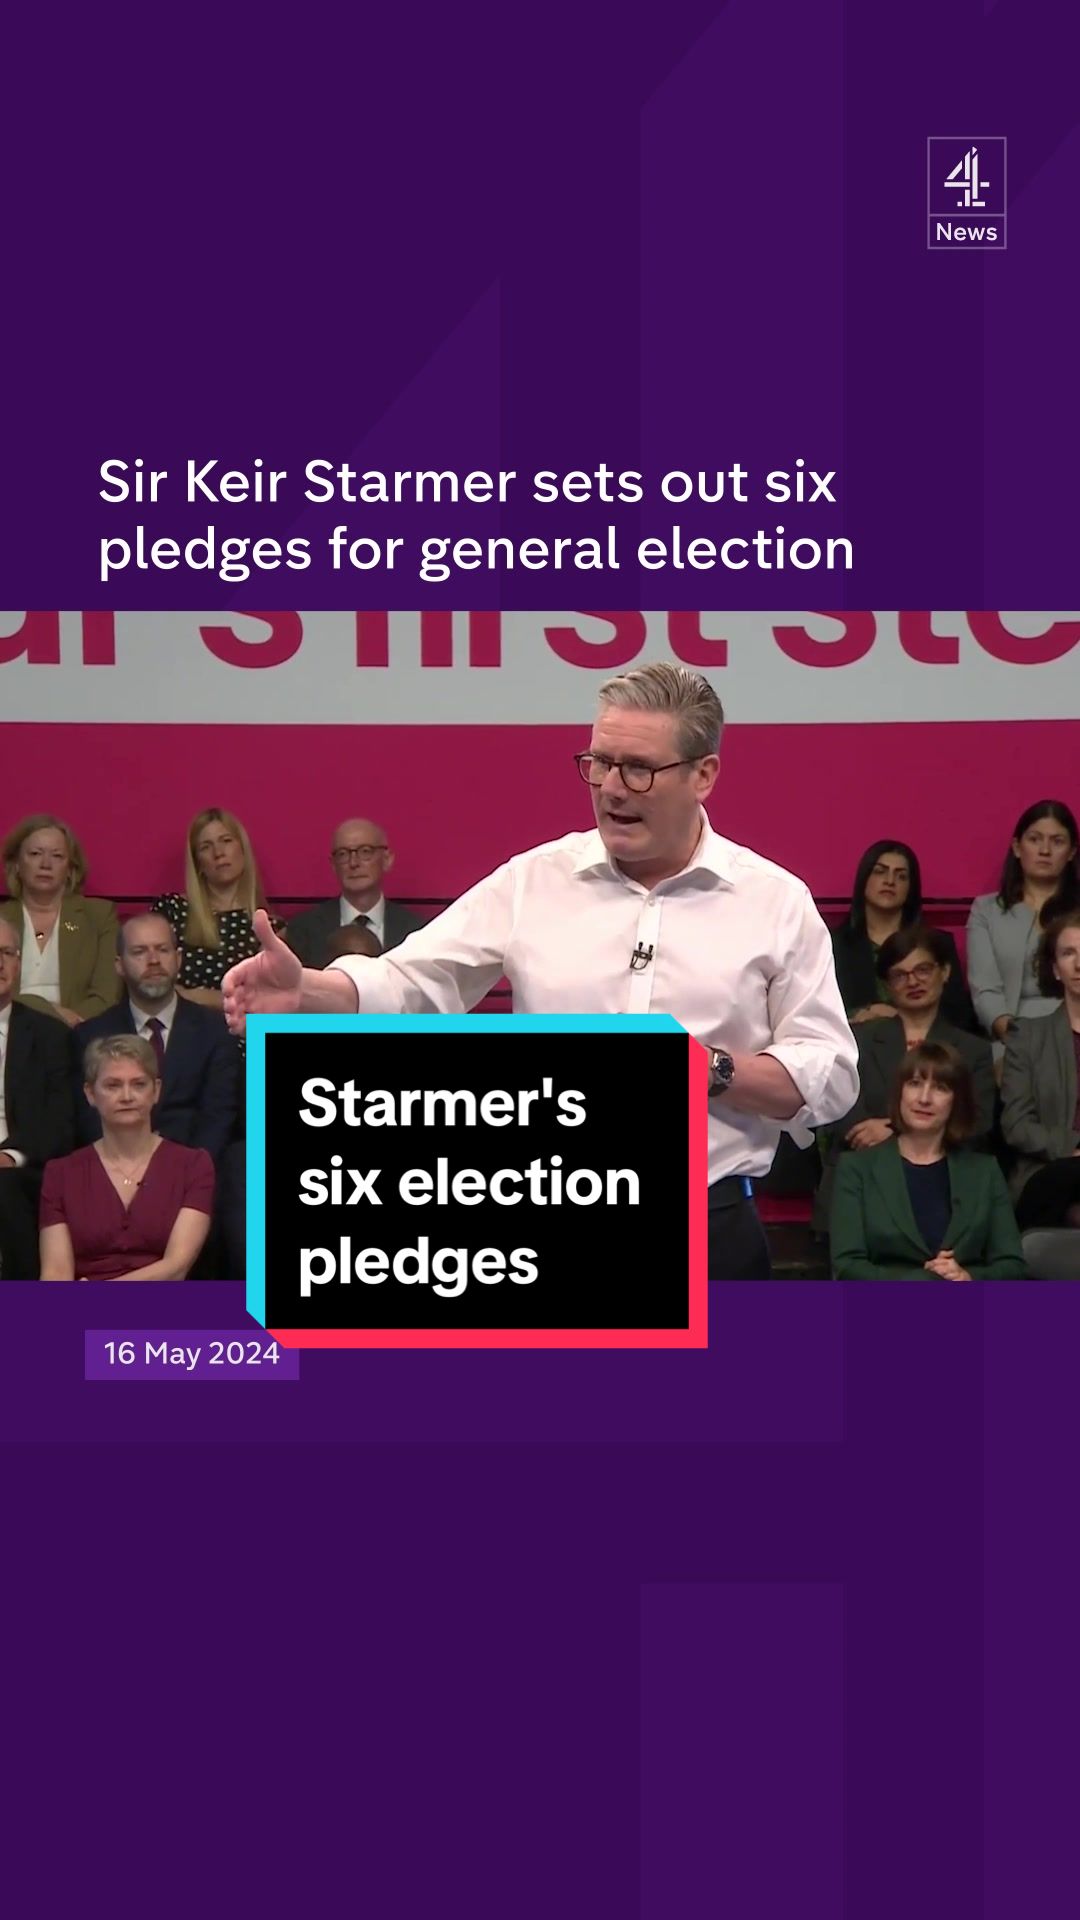 Sir Keir Starmer and his team have been outlining the "first steps" Labour take if they win the next election. There are six pledges including delivering economic stability, cutting NHS waiting times, launching a new border security command, setting up a publicly-owned energy firm, cracking down on antisocial behaviour and recruiting 6,500 new teachers. #Labour #MyFirstSteps #LabourParty #SirKeirStarmer #Starmer #Election2024 #ConservativeParty #UKPolitics #C4news